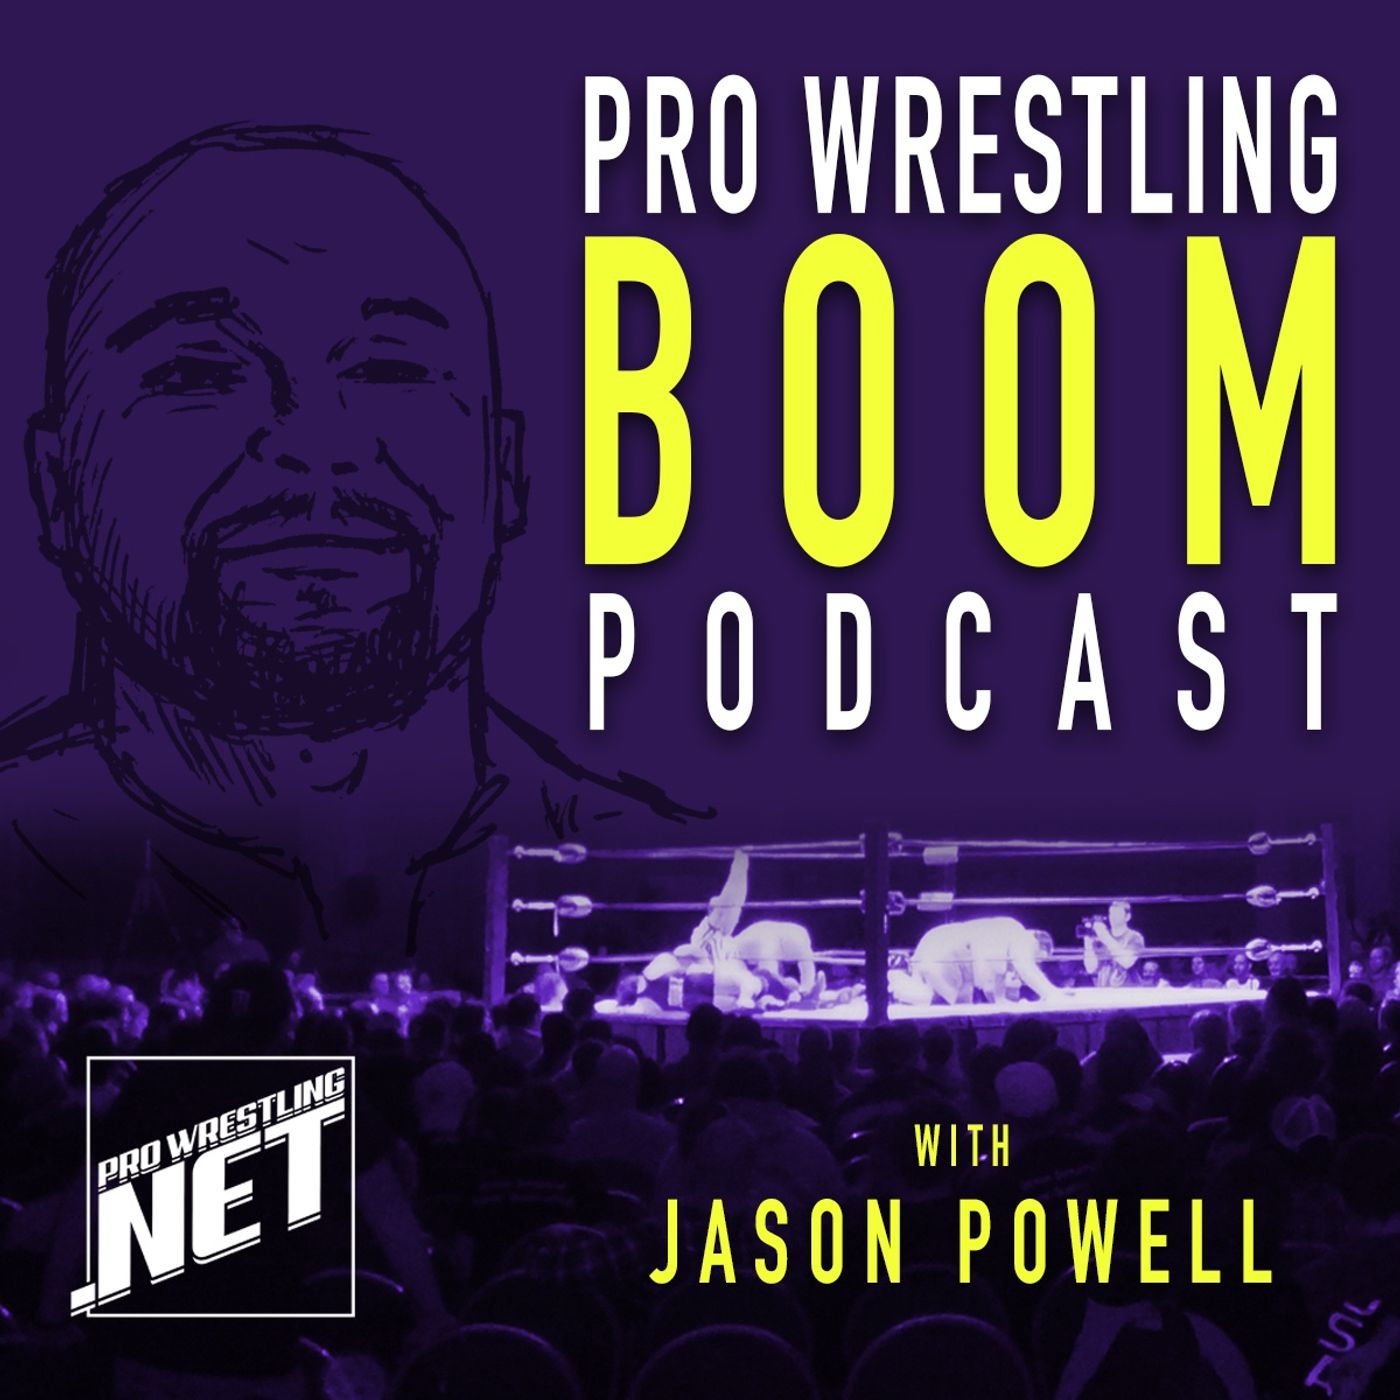 06/24 Pro Wrestling Boom Podcast With Jason Powell (Episode 116): Josh Nason discusses the #SpeakingOut movement